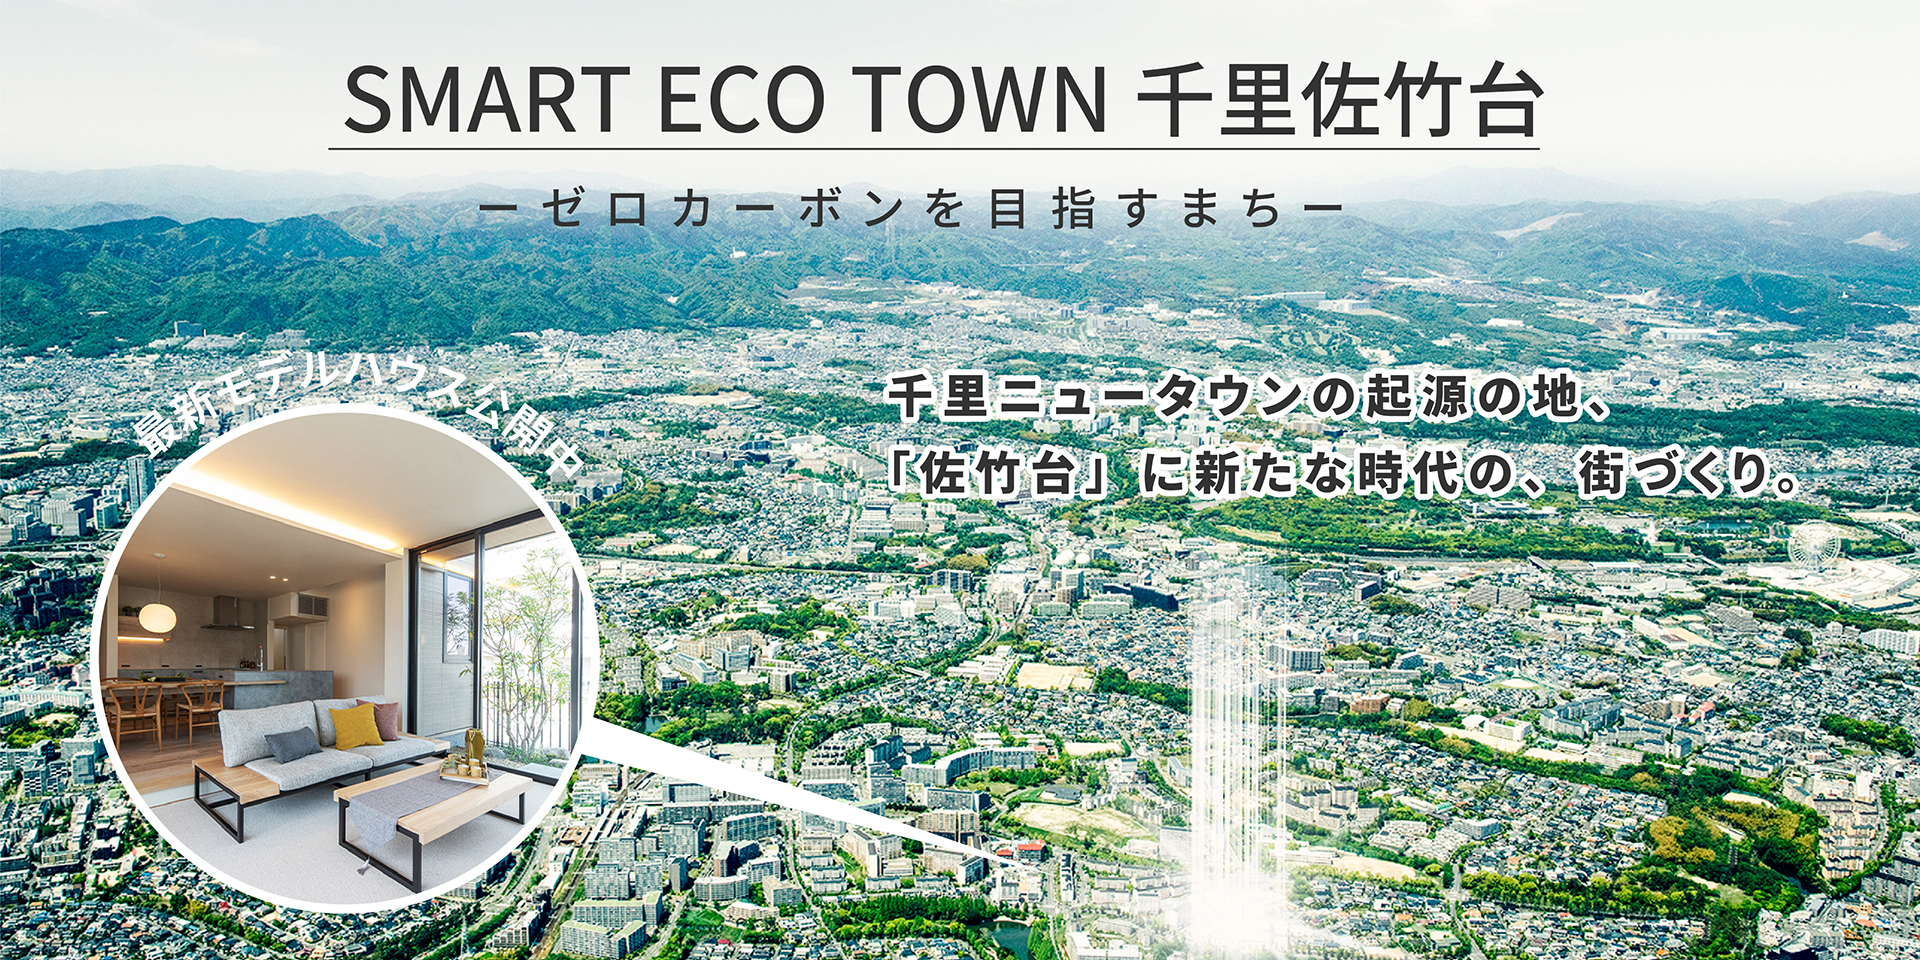 SMART ECO TOWN 千里佐竹台